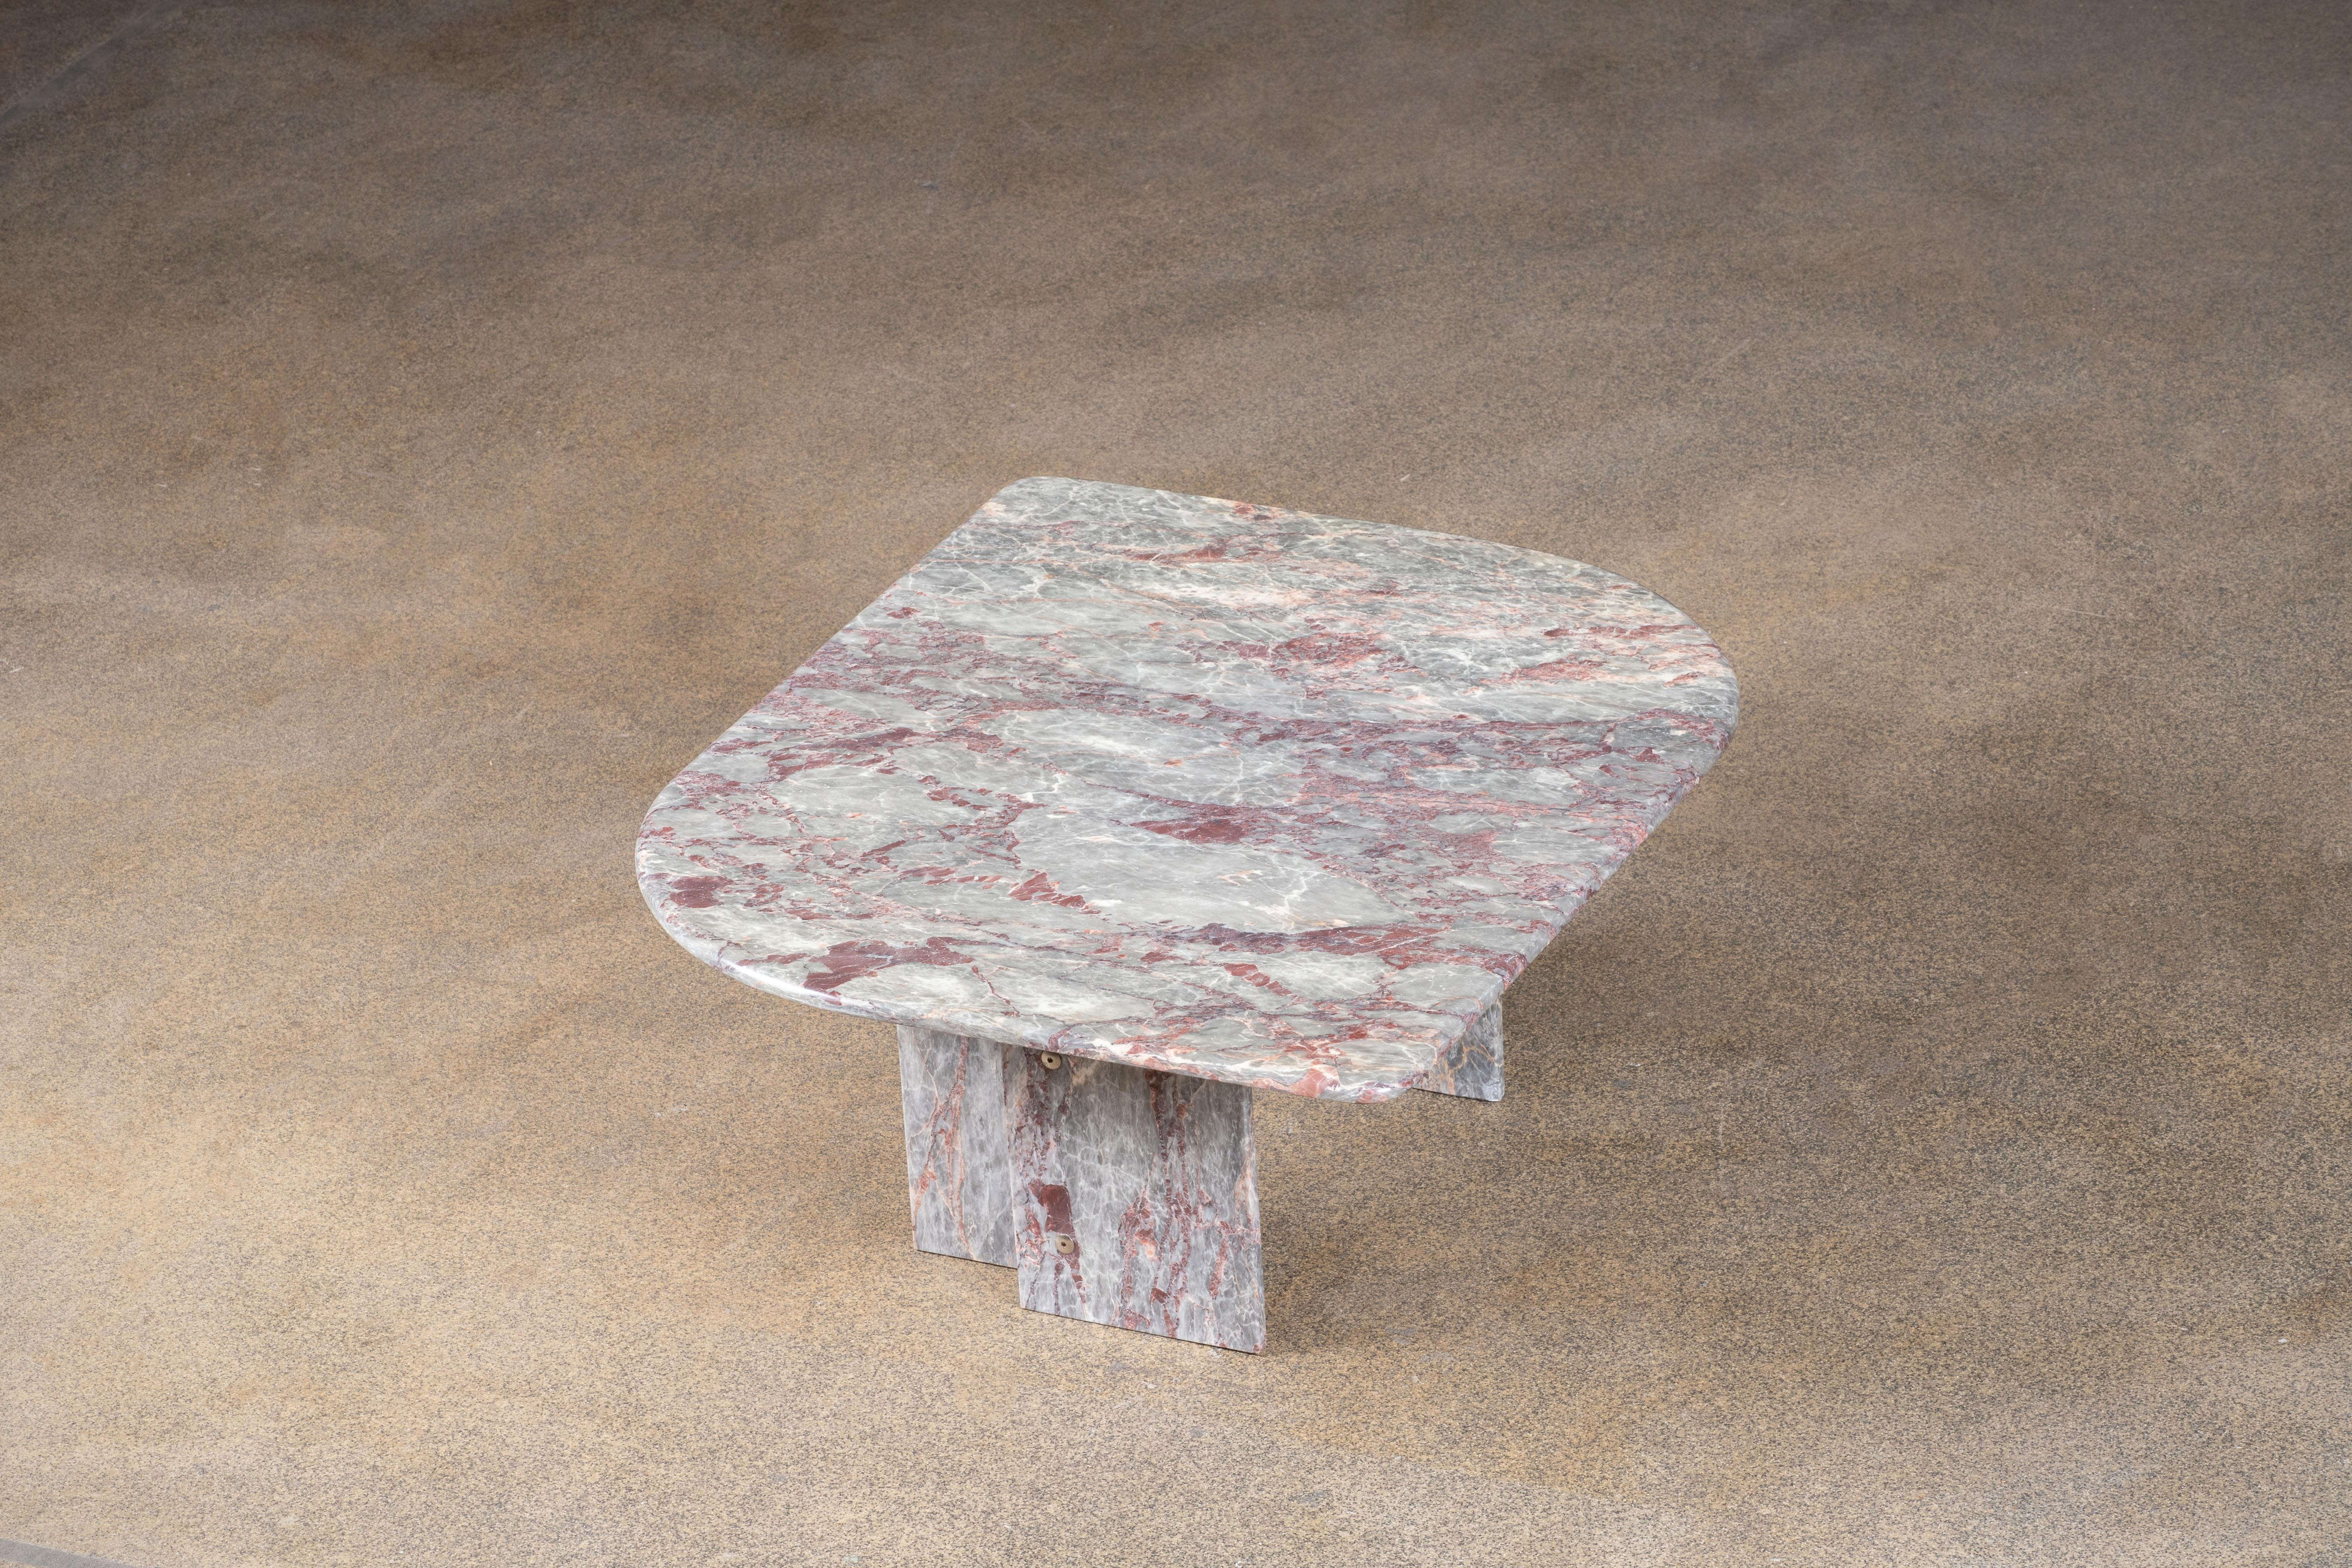 Italian Design Marble Coffee Table, 1970 For Sale 8